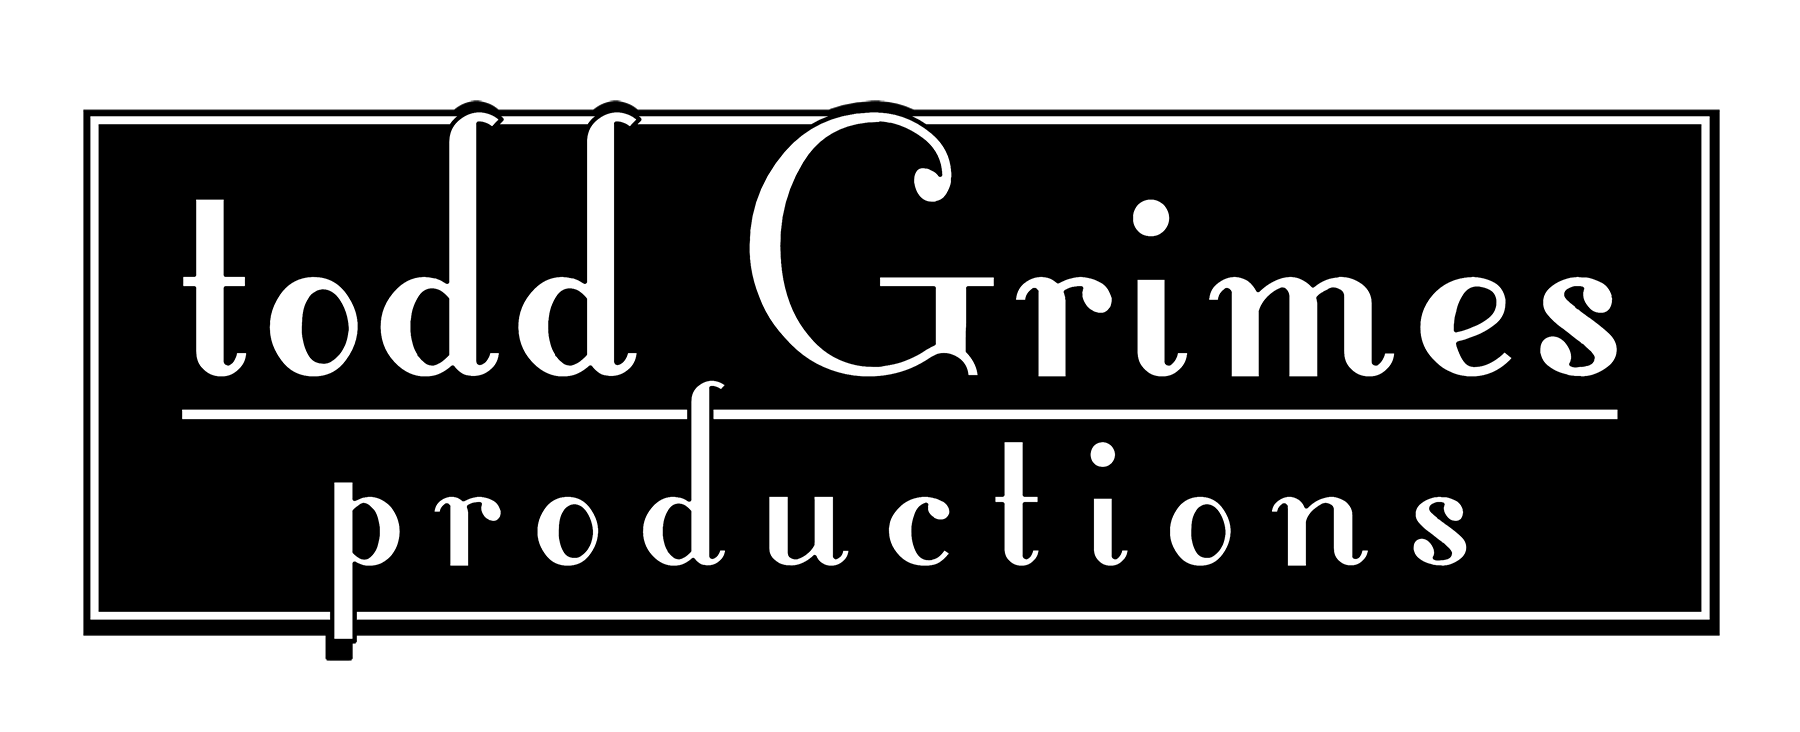 Todd Grimes Productions